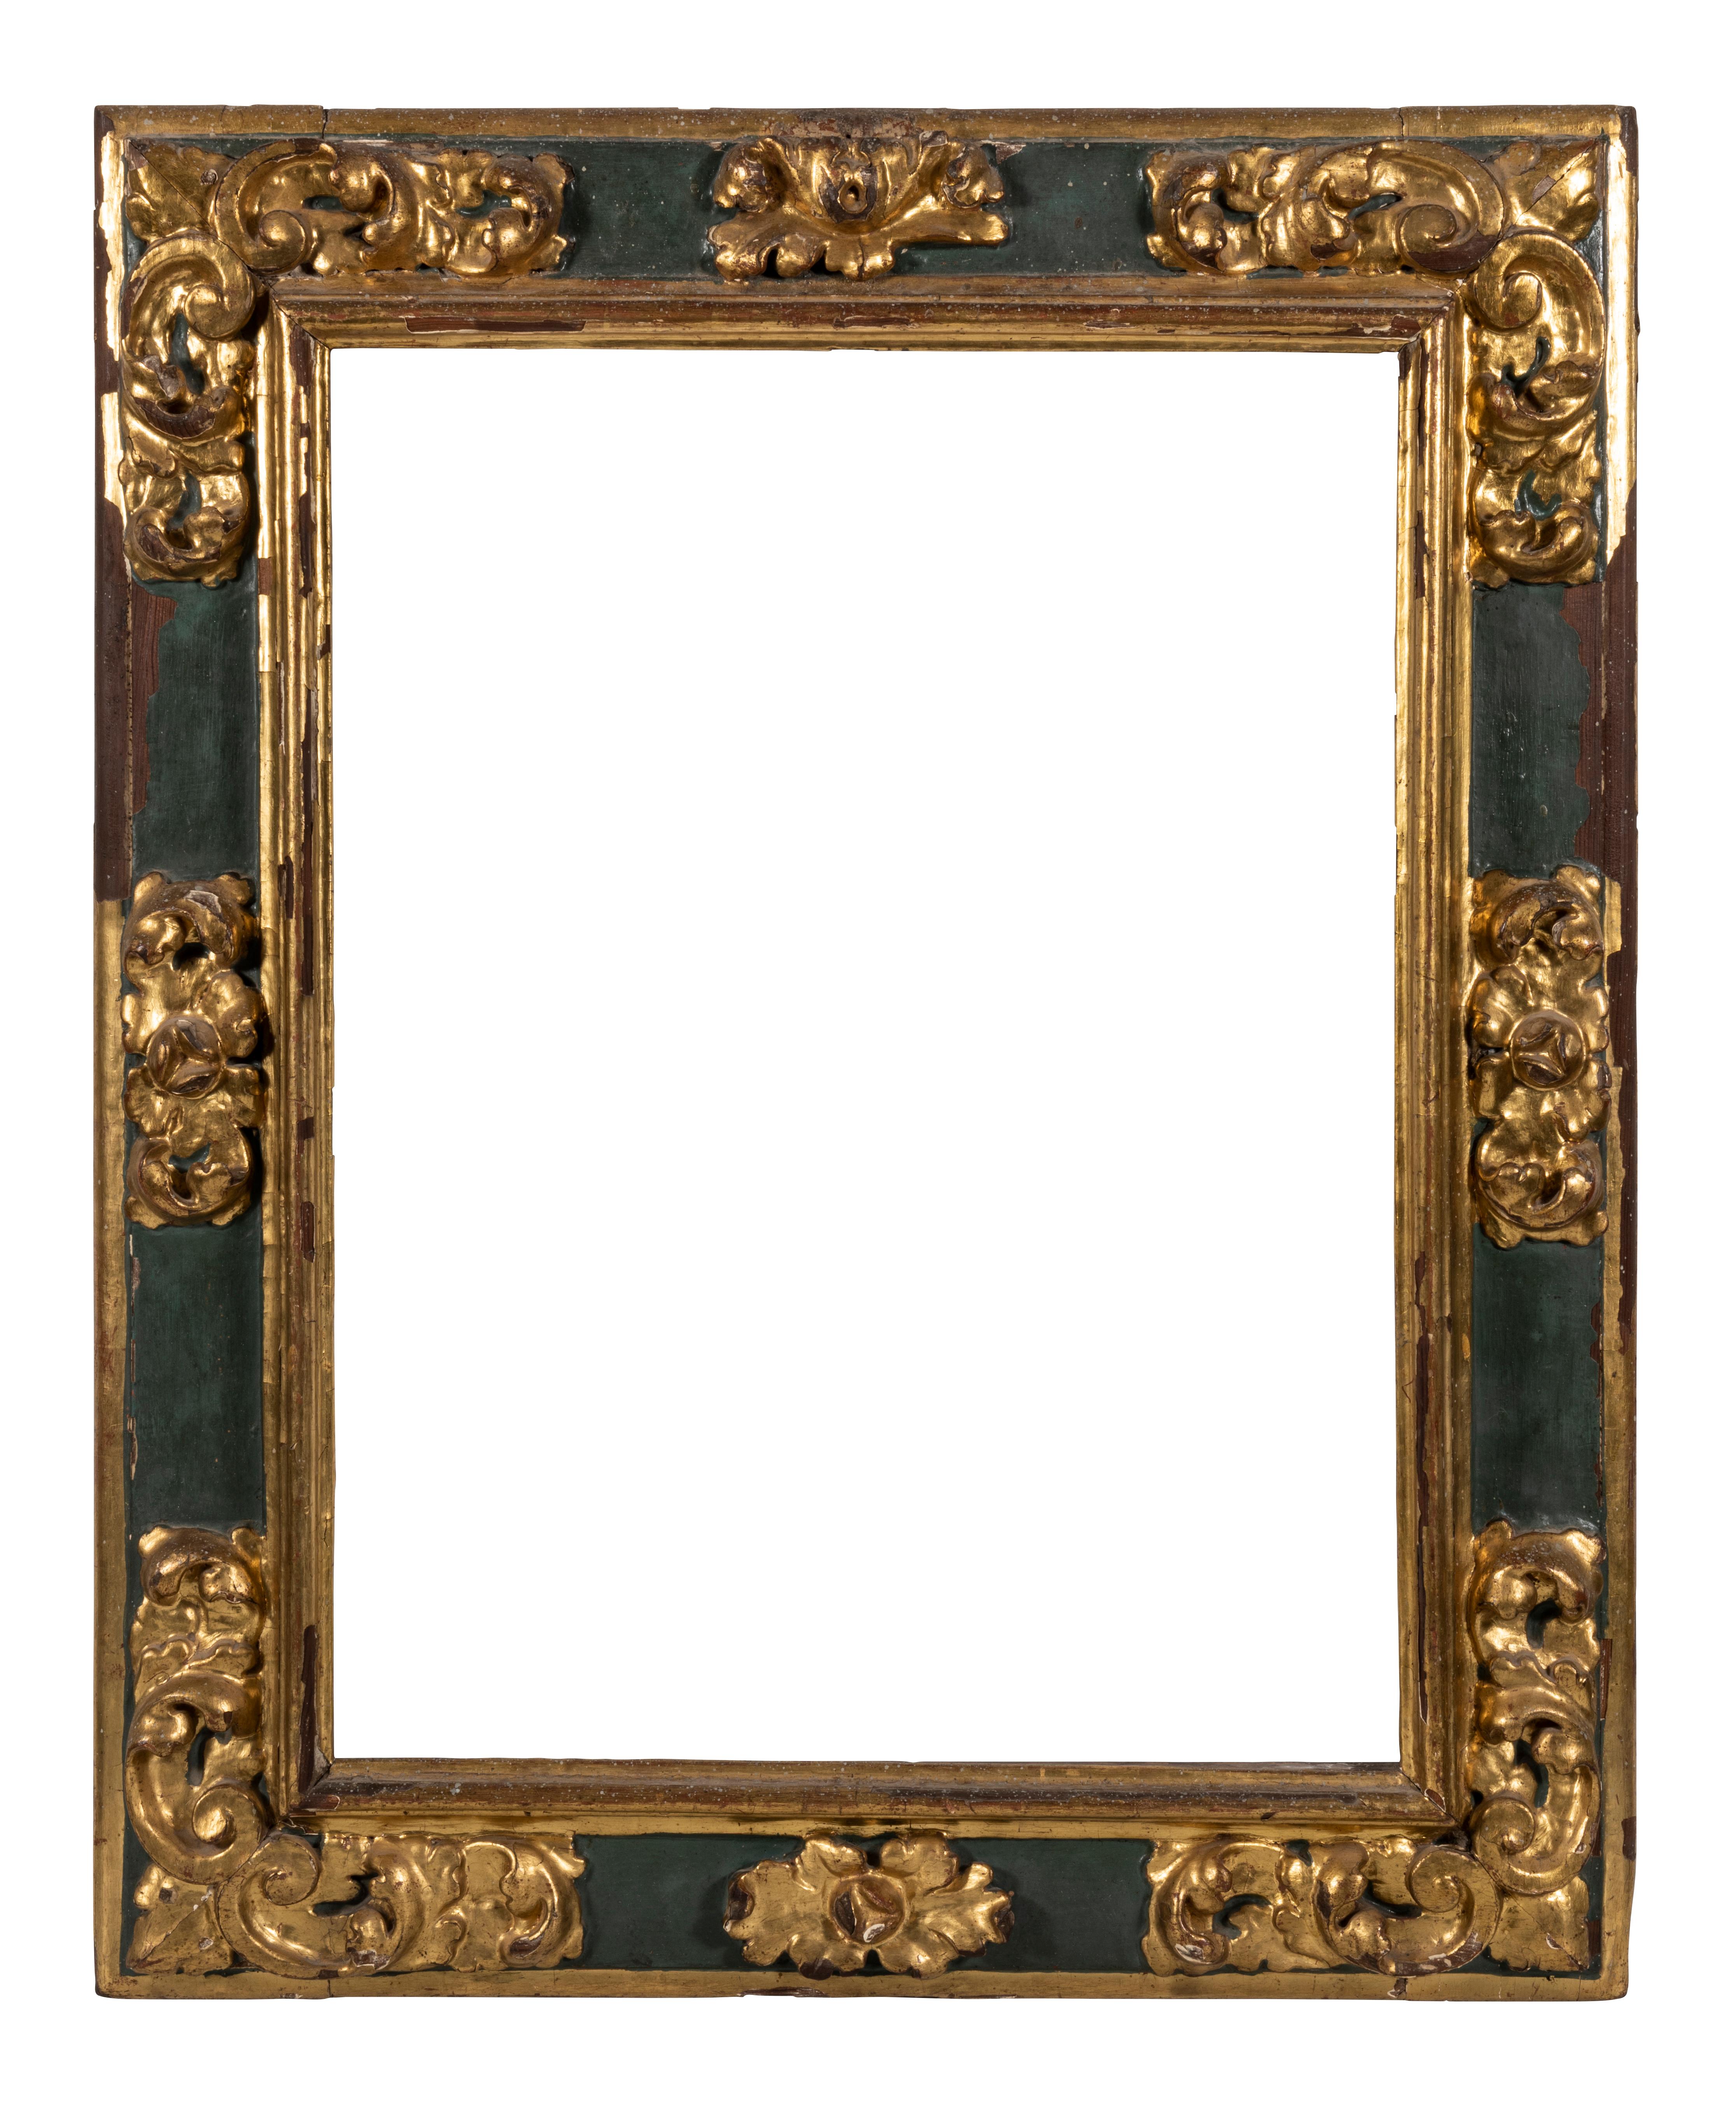 A Late 17th-Early 18th Century Spanish Gilt and Polychrome Frame For Sale